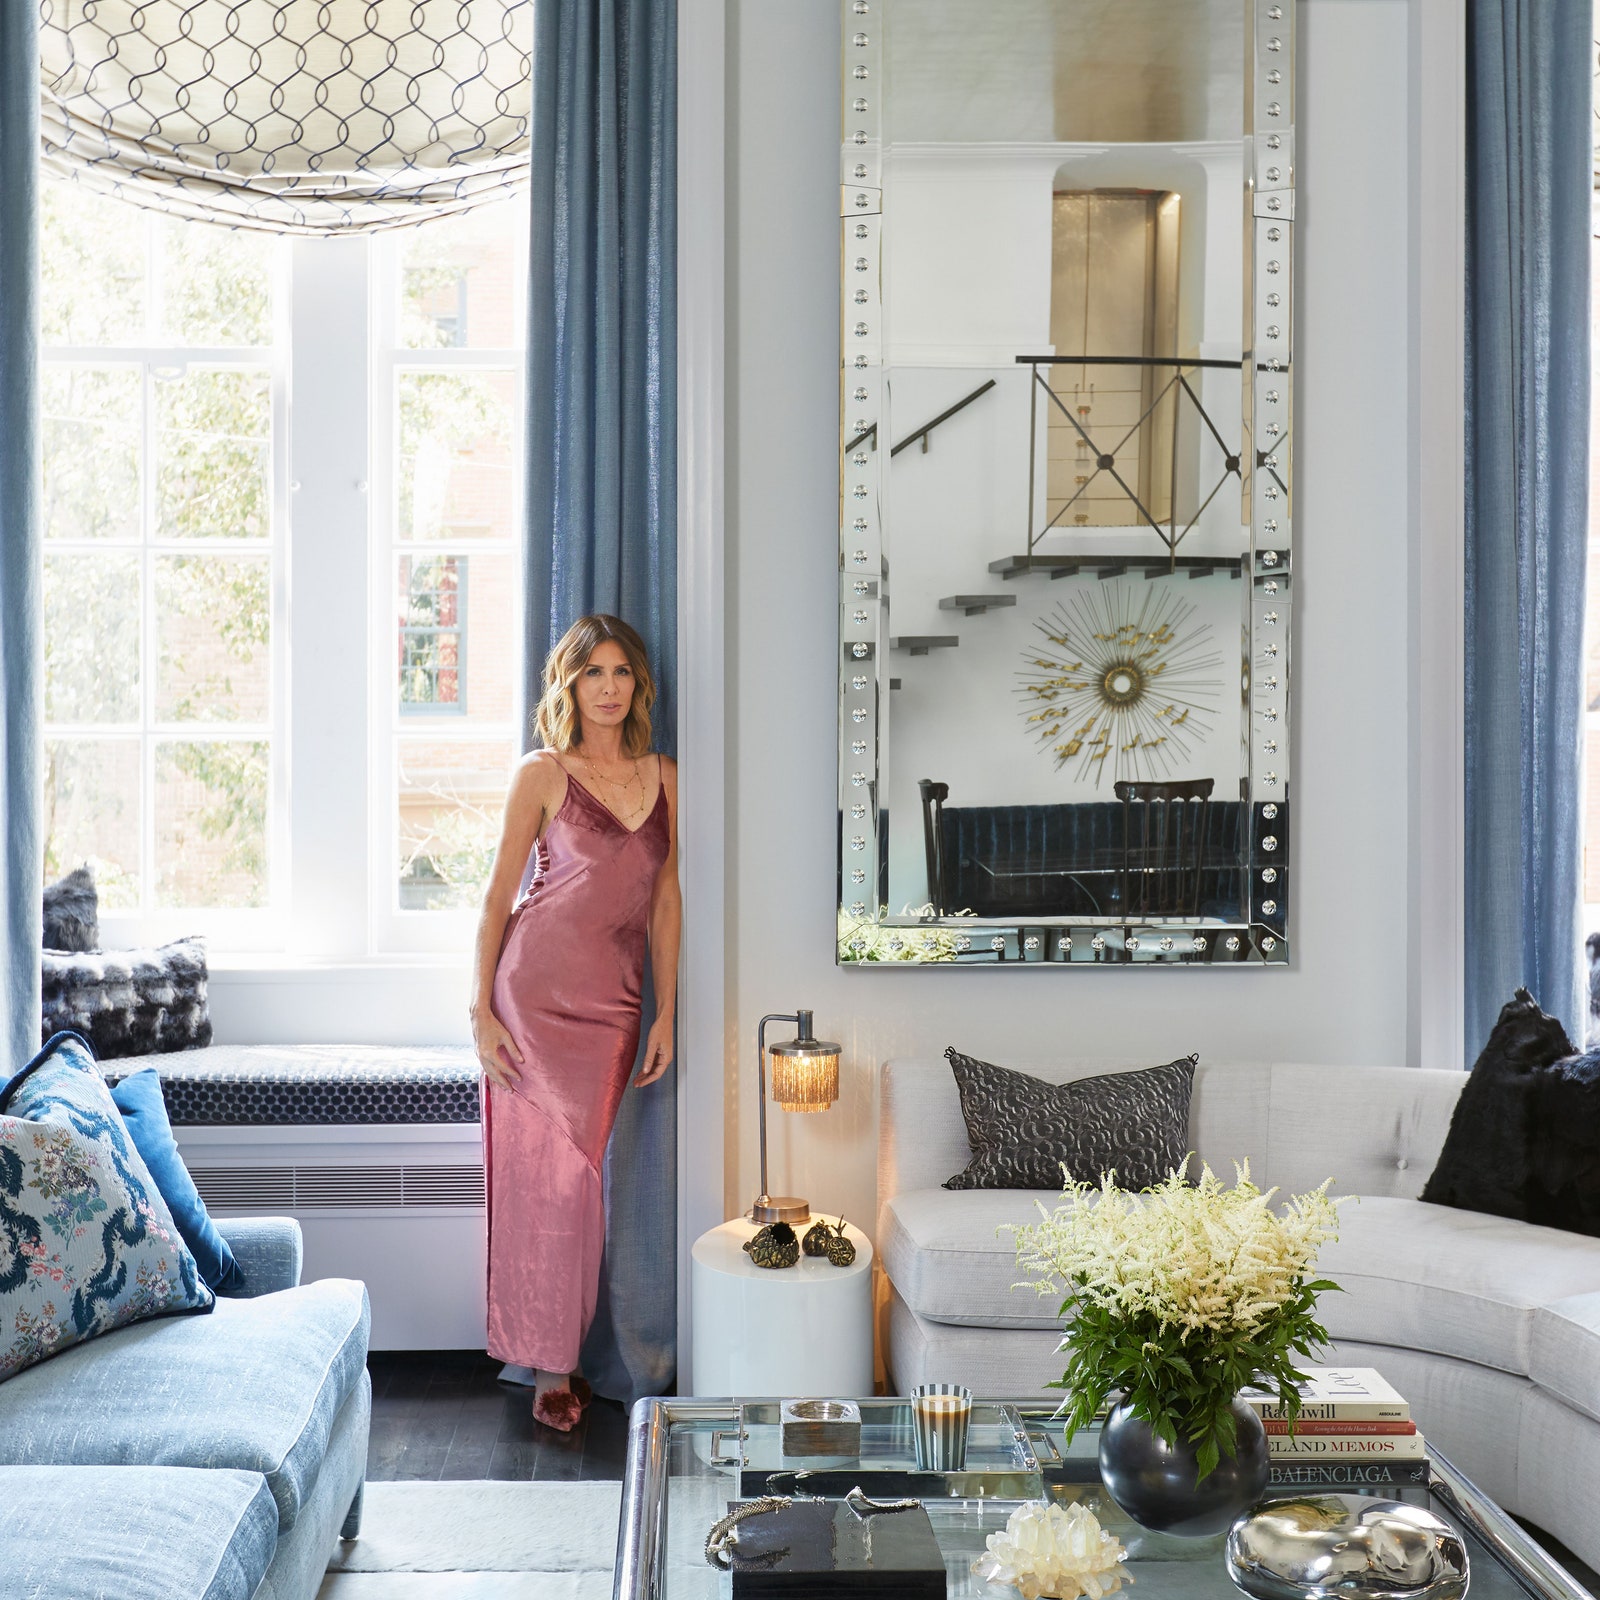 Inside the Lavish Abodes of 6 Real Housewives Stars